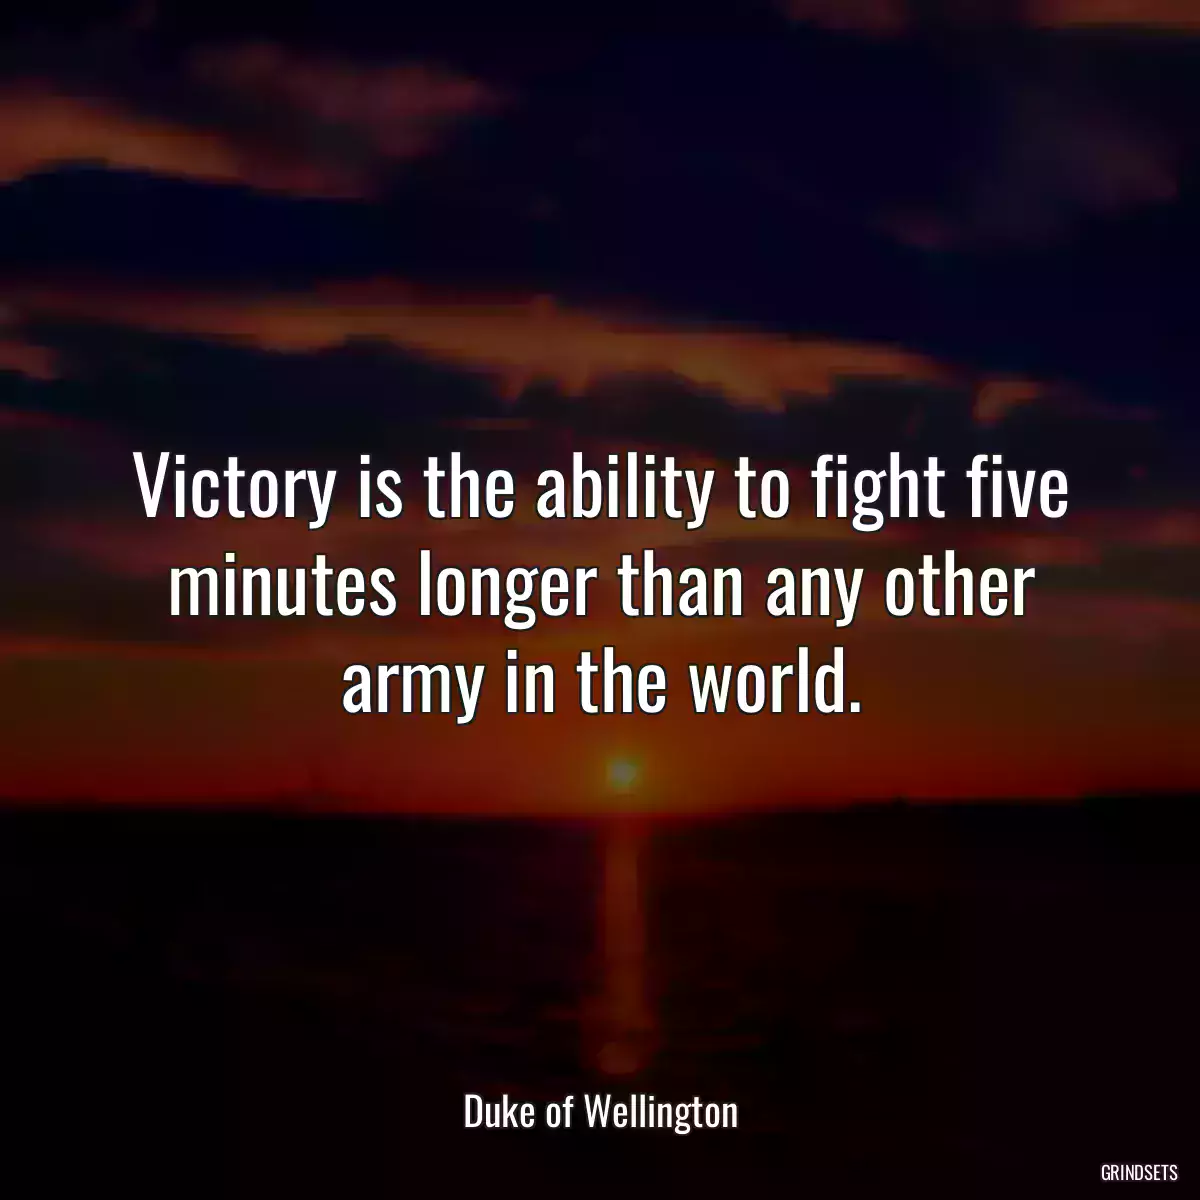 Victory is the ability to fight five minutes longer than any other army in the world.